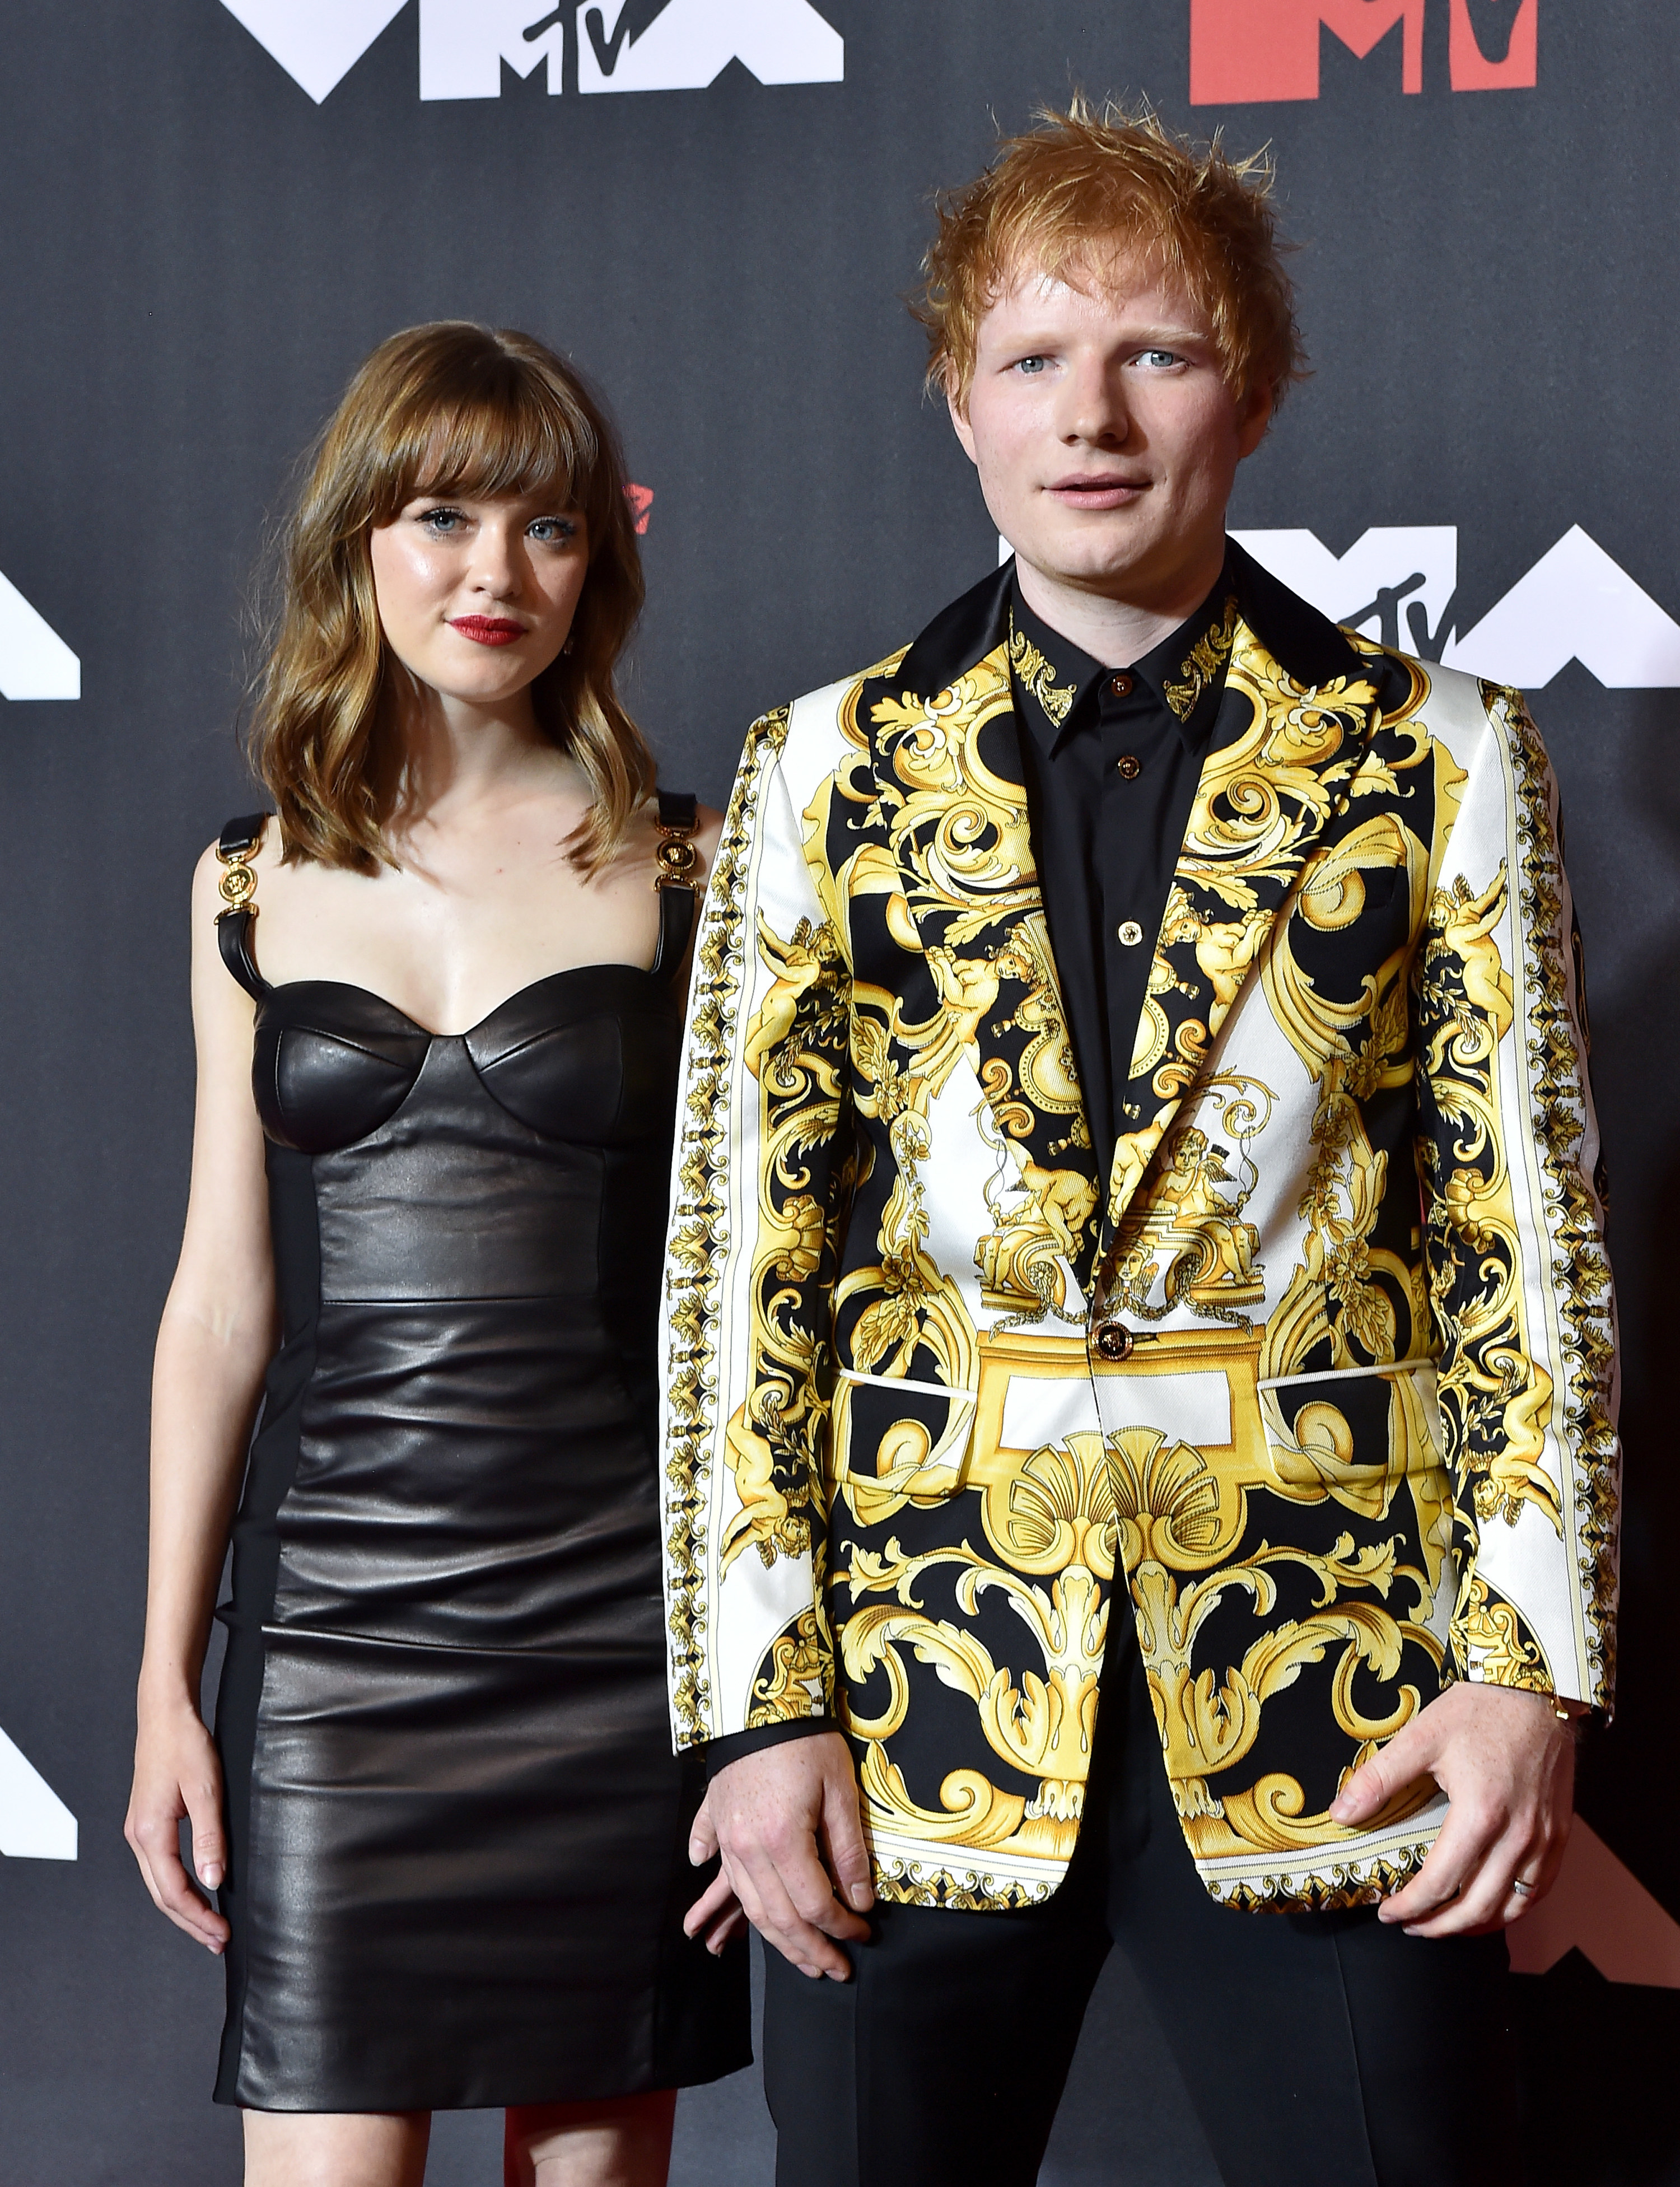 Maisie and Ed standing together